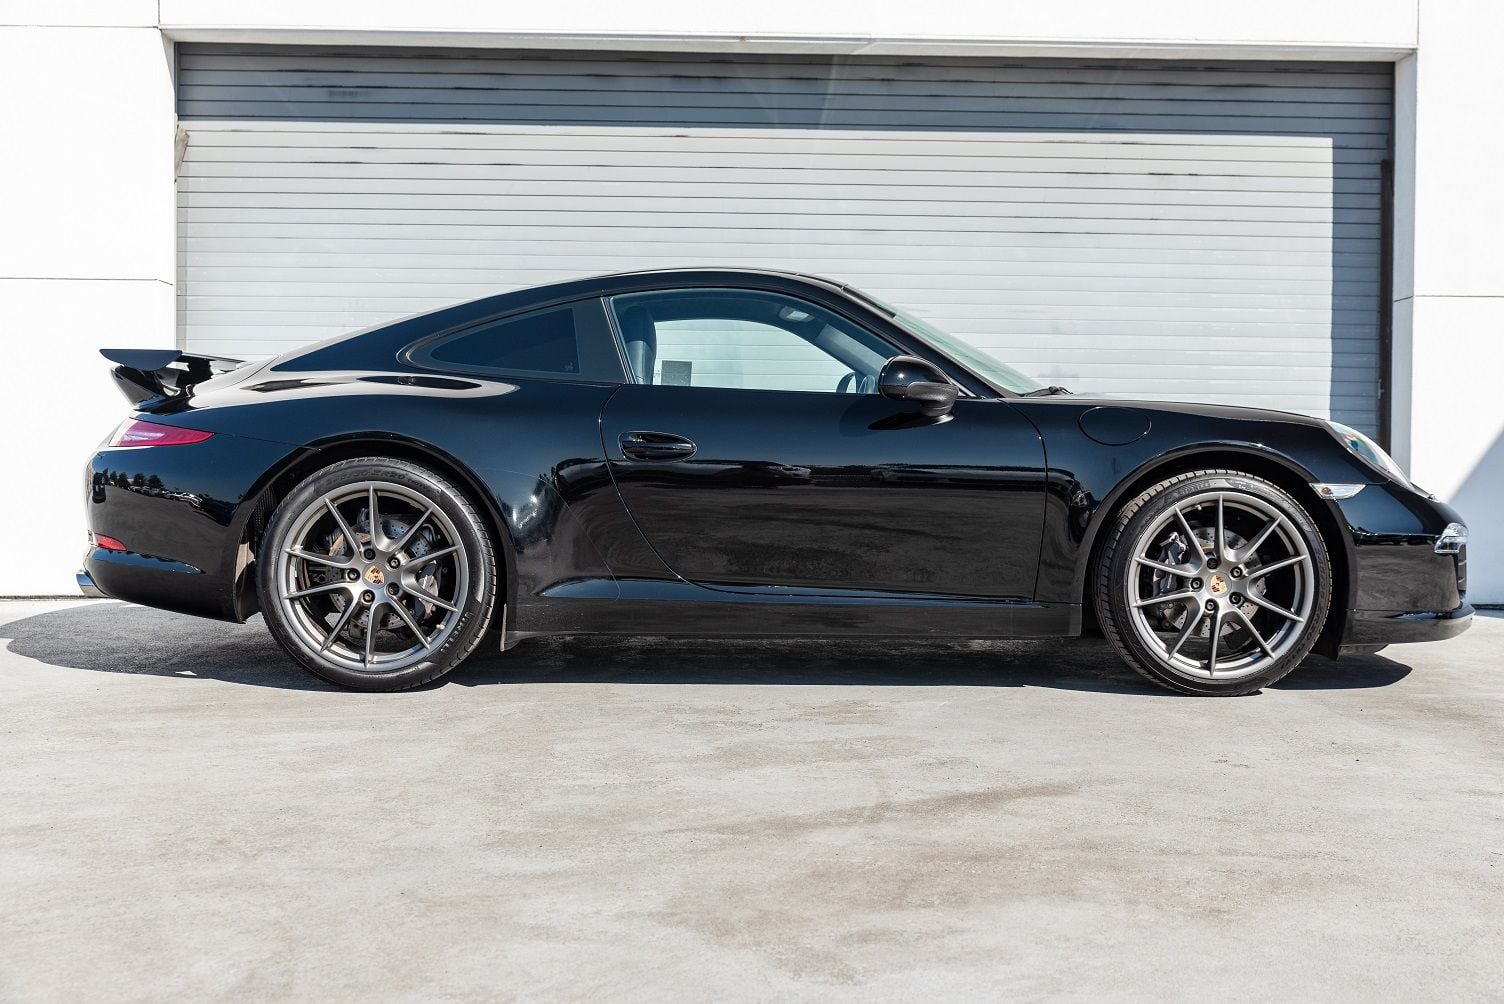 2013 Porsche 911 - Aerokit 911 under 20k miles - Used - VIN WP0AA2A96DS107736 - 19,457 Miles - 6 cyl - 2WD - Automatic - Coupe - Black - Fresno, CA 93650, United States